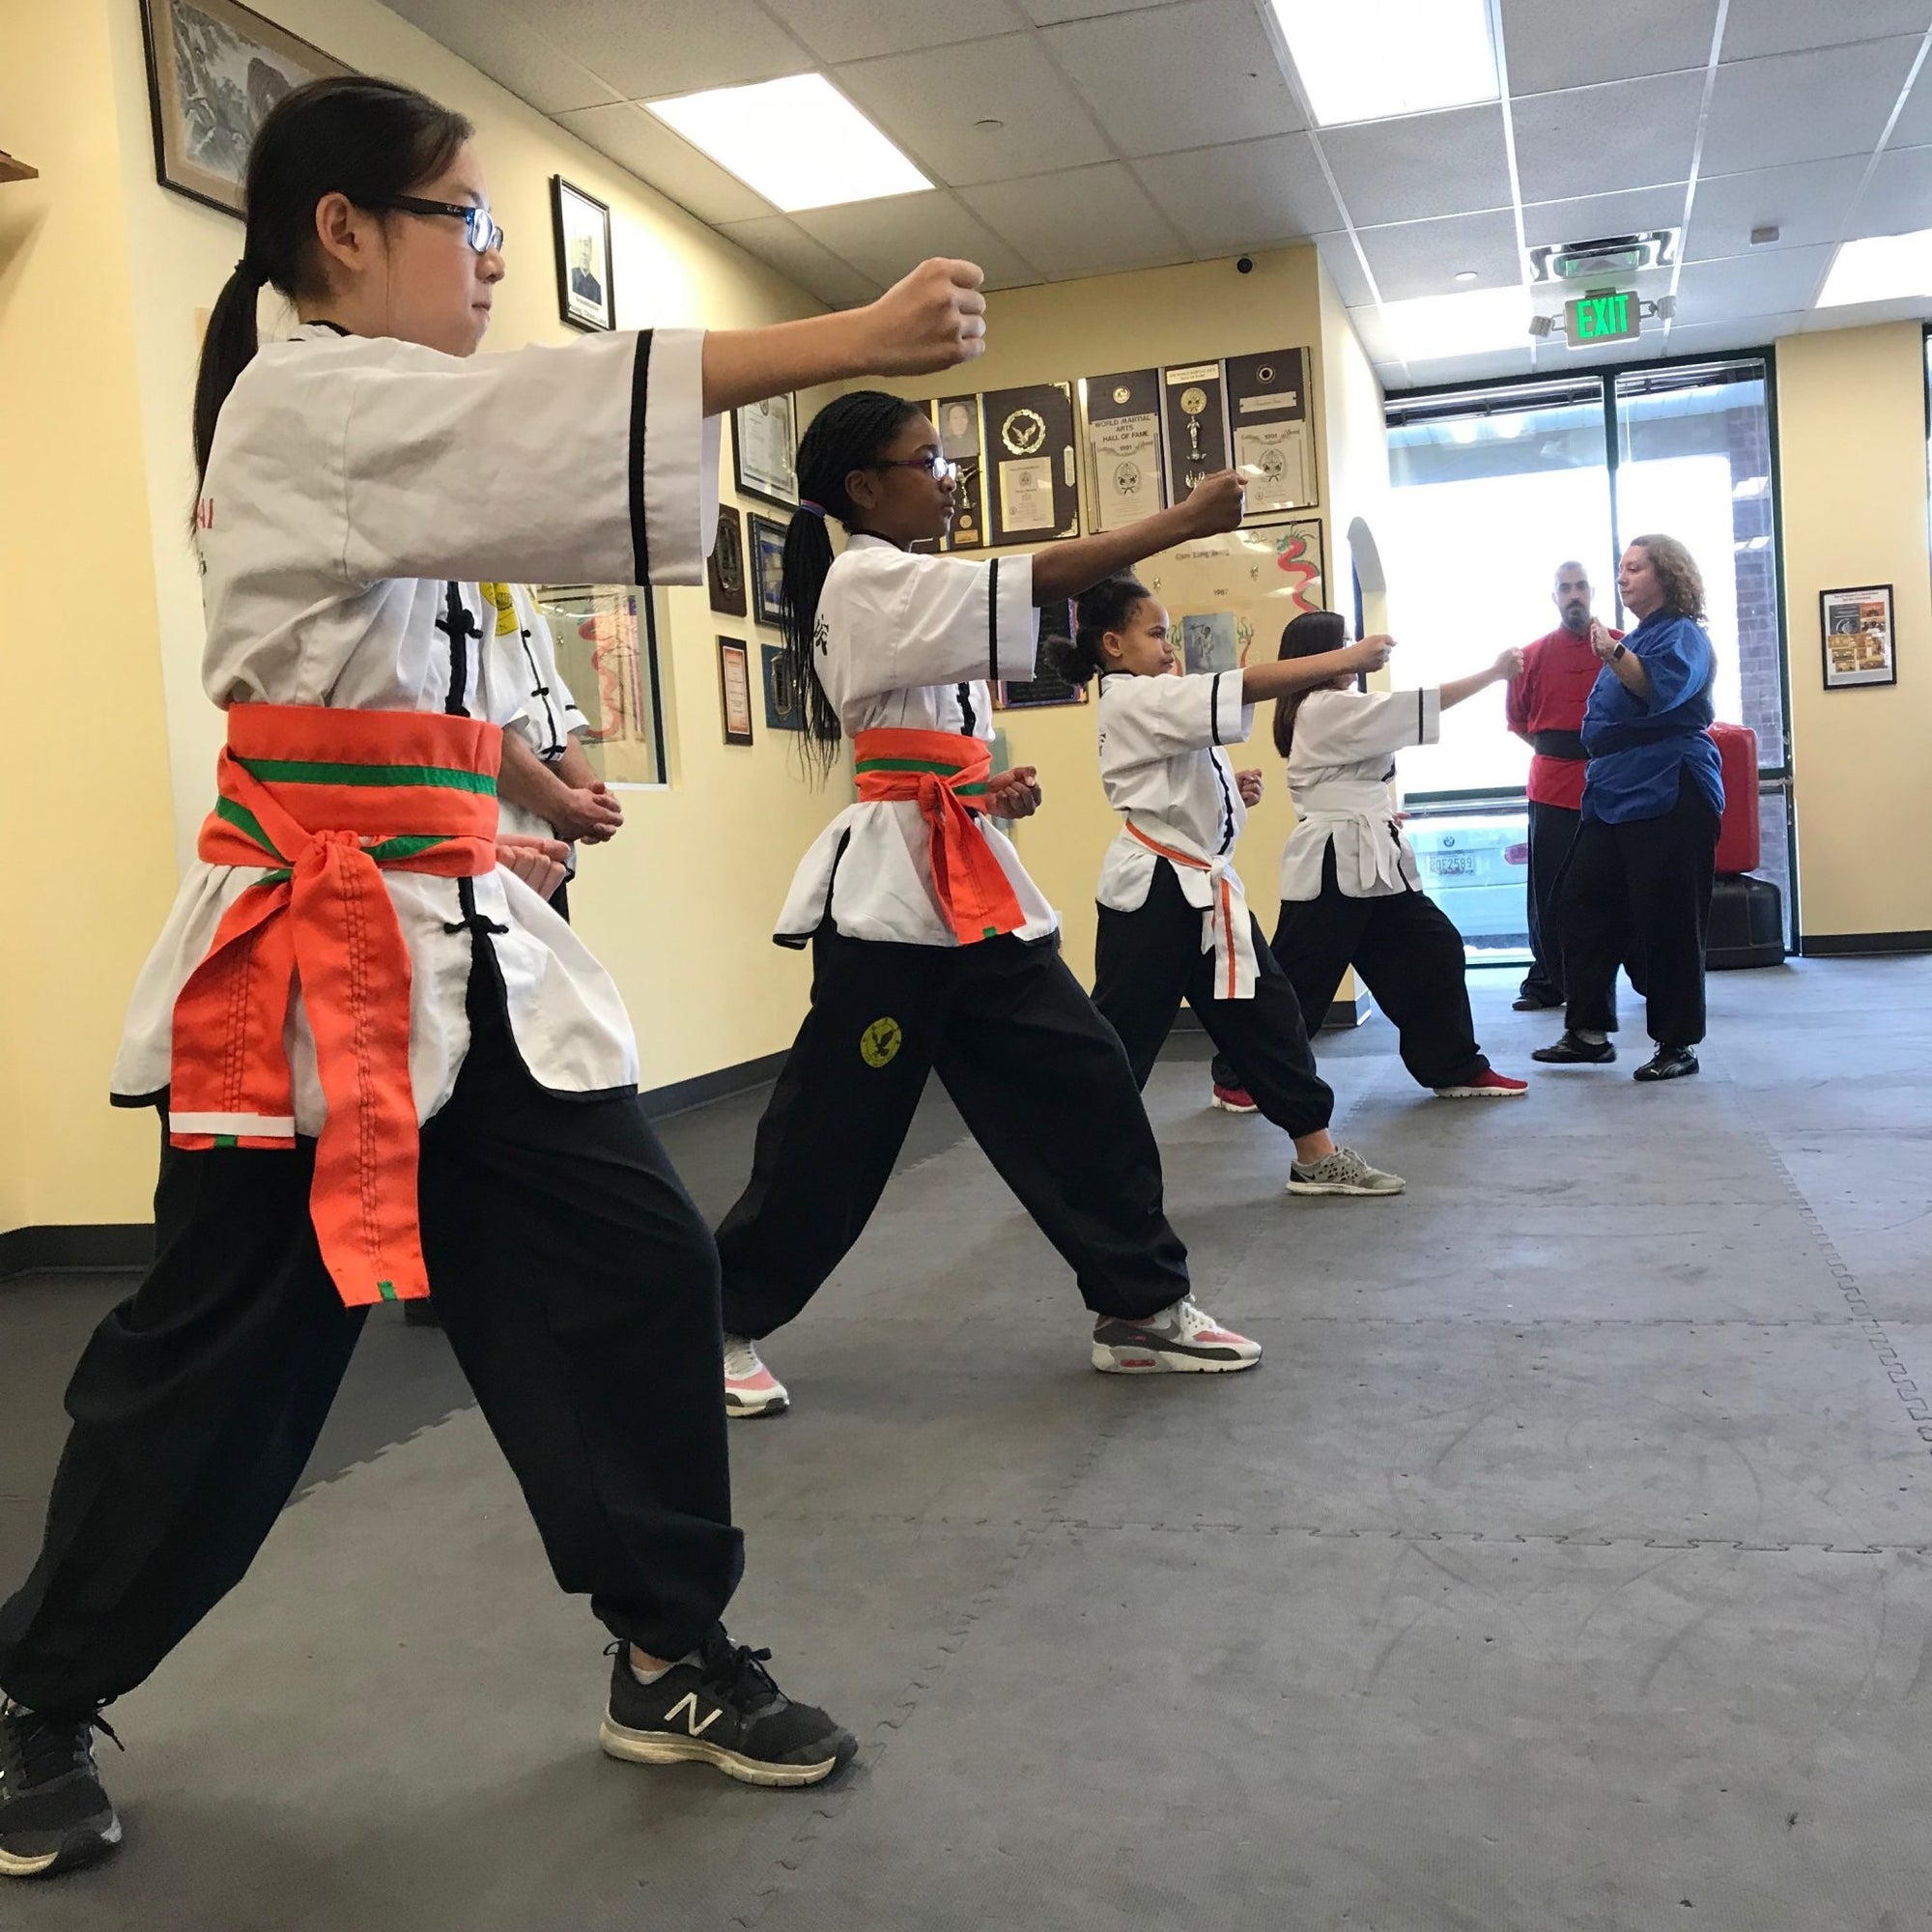 HOW TO CHOOSE THE BEST OWINGS MILLS KARATE FOR MY CHILD